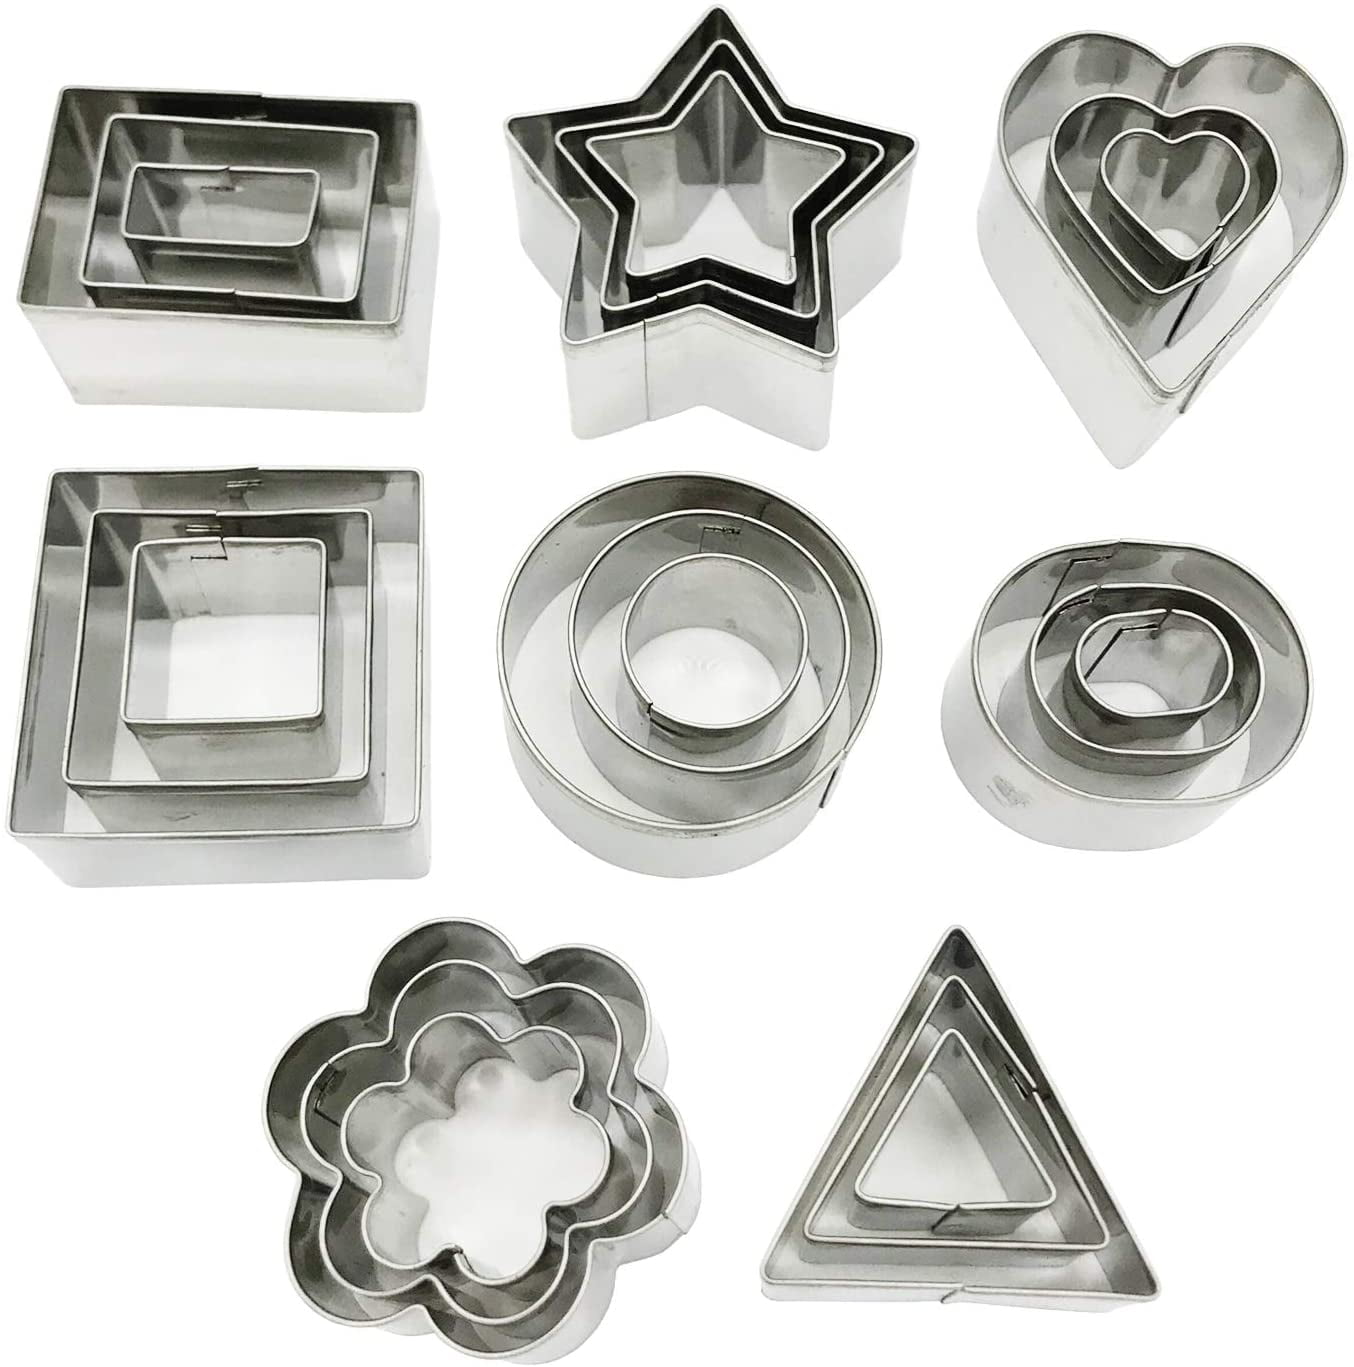 Bouquet Flower Stainless Steel Cookie Cutter Cake Baking Biscuit Mould Mold 